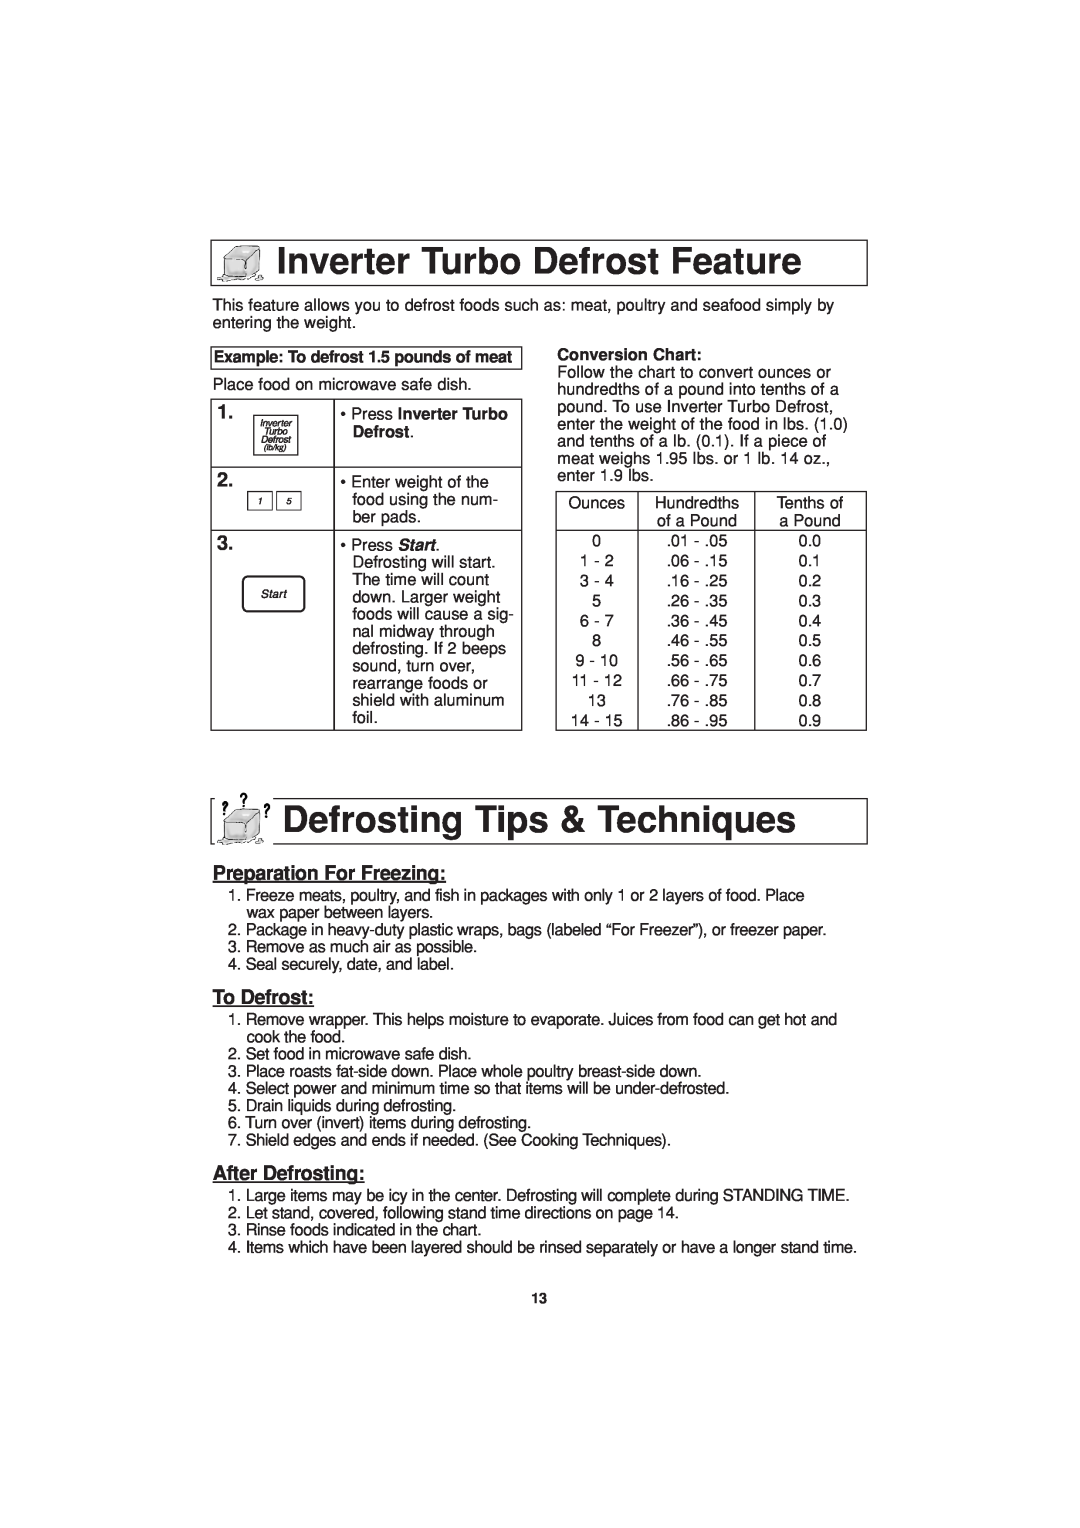 Panasonic NN-H634 Inverter Turbo Defrost Feature, Defrosting Tips & Techniques, Preparation For Freezing, To Defrost 